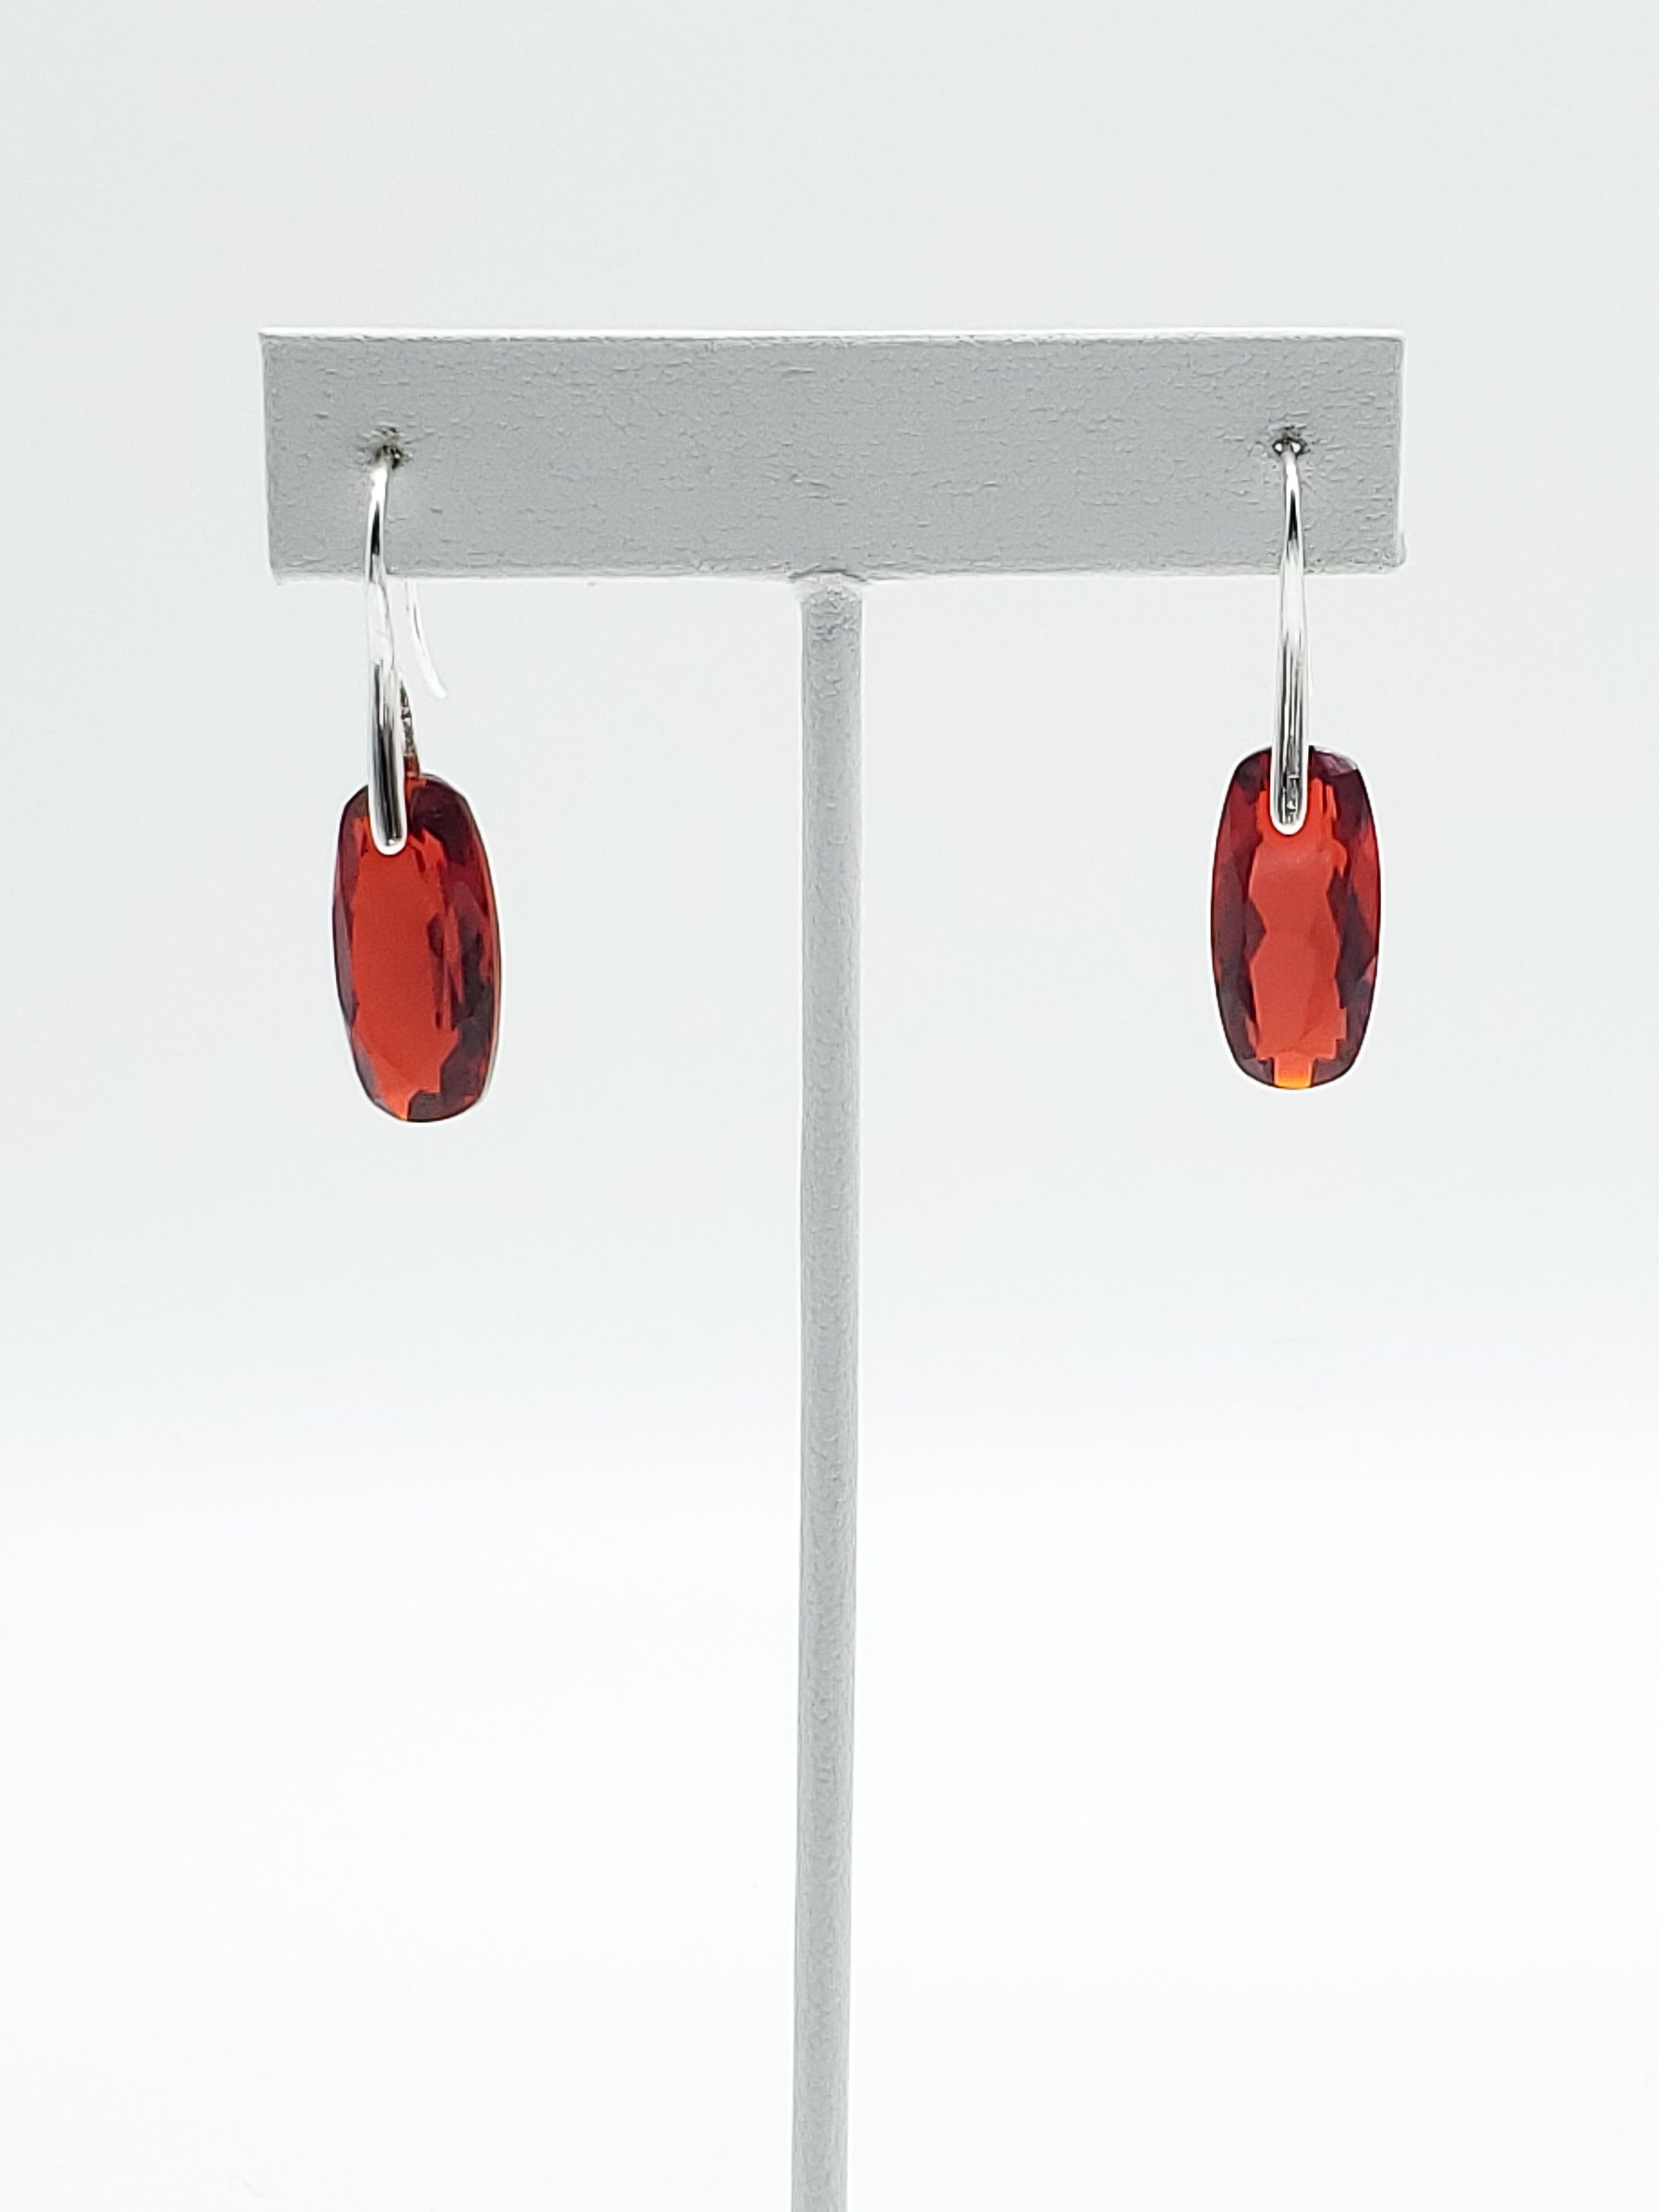 Cushion Cut Hydro Red Quartz Earrings on Sterling Silver Ear Wires - The Caffeinated Raven